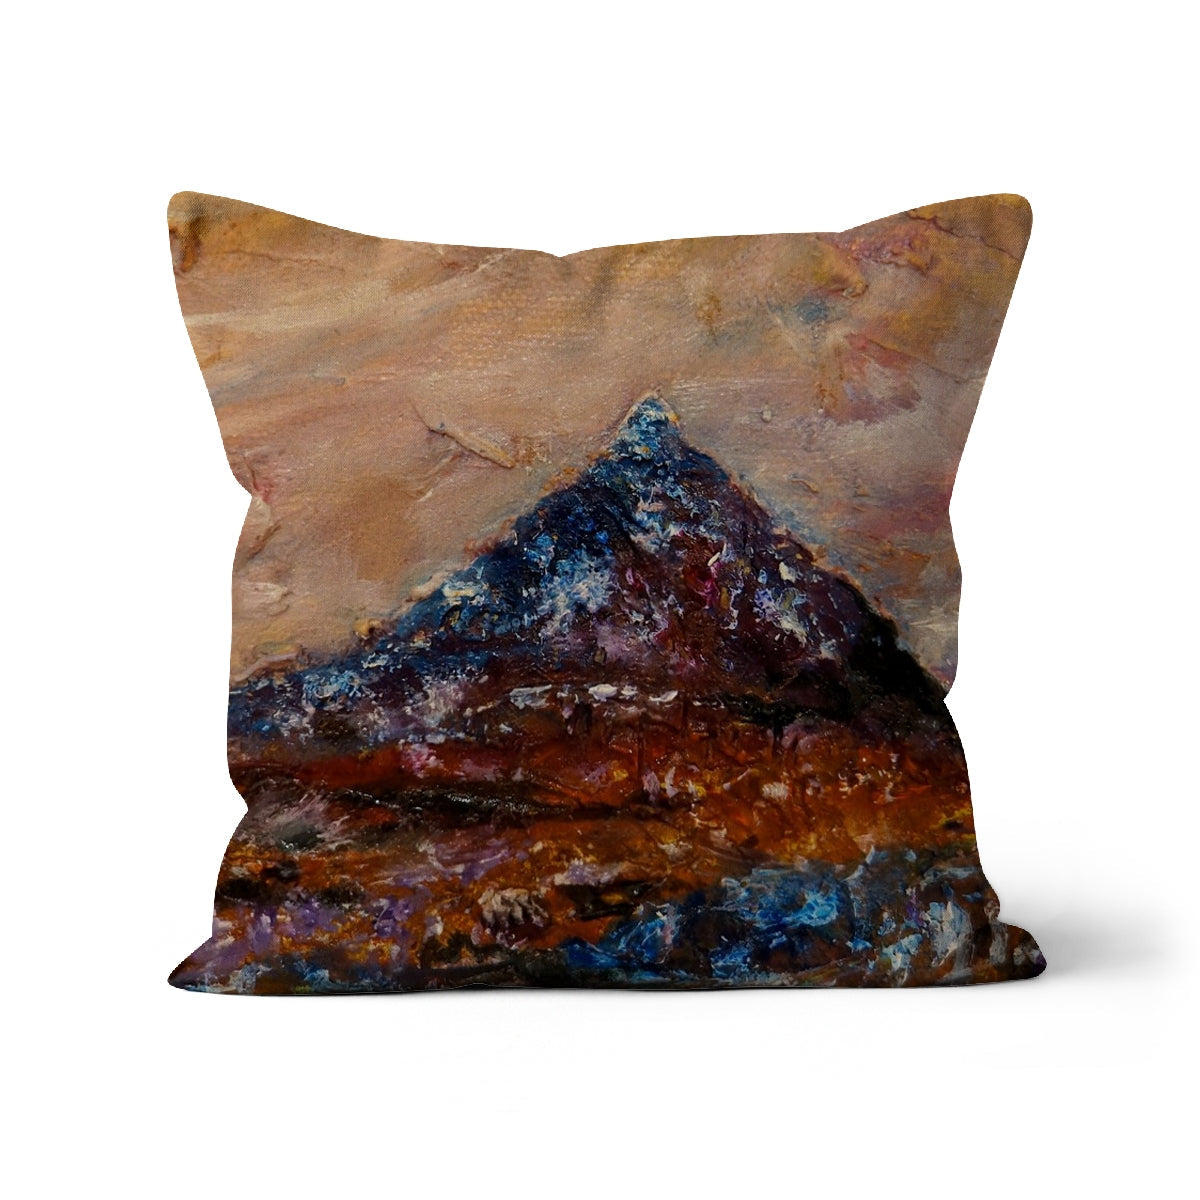 Buachaille Etive Mòr Art Gifts Cushion-Cushions-Glencoe Art Gallery-Canvas-24"x24"-Paintings, Prints, Homeware, Art Gifts From Scotland By Scottish Artist Kevin Hunter